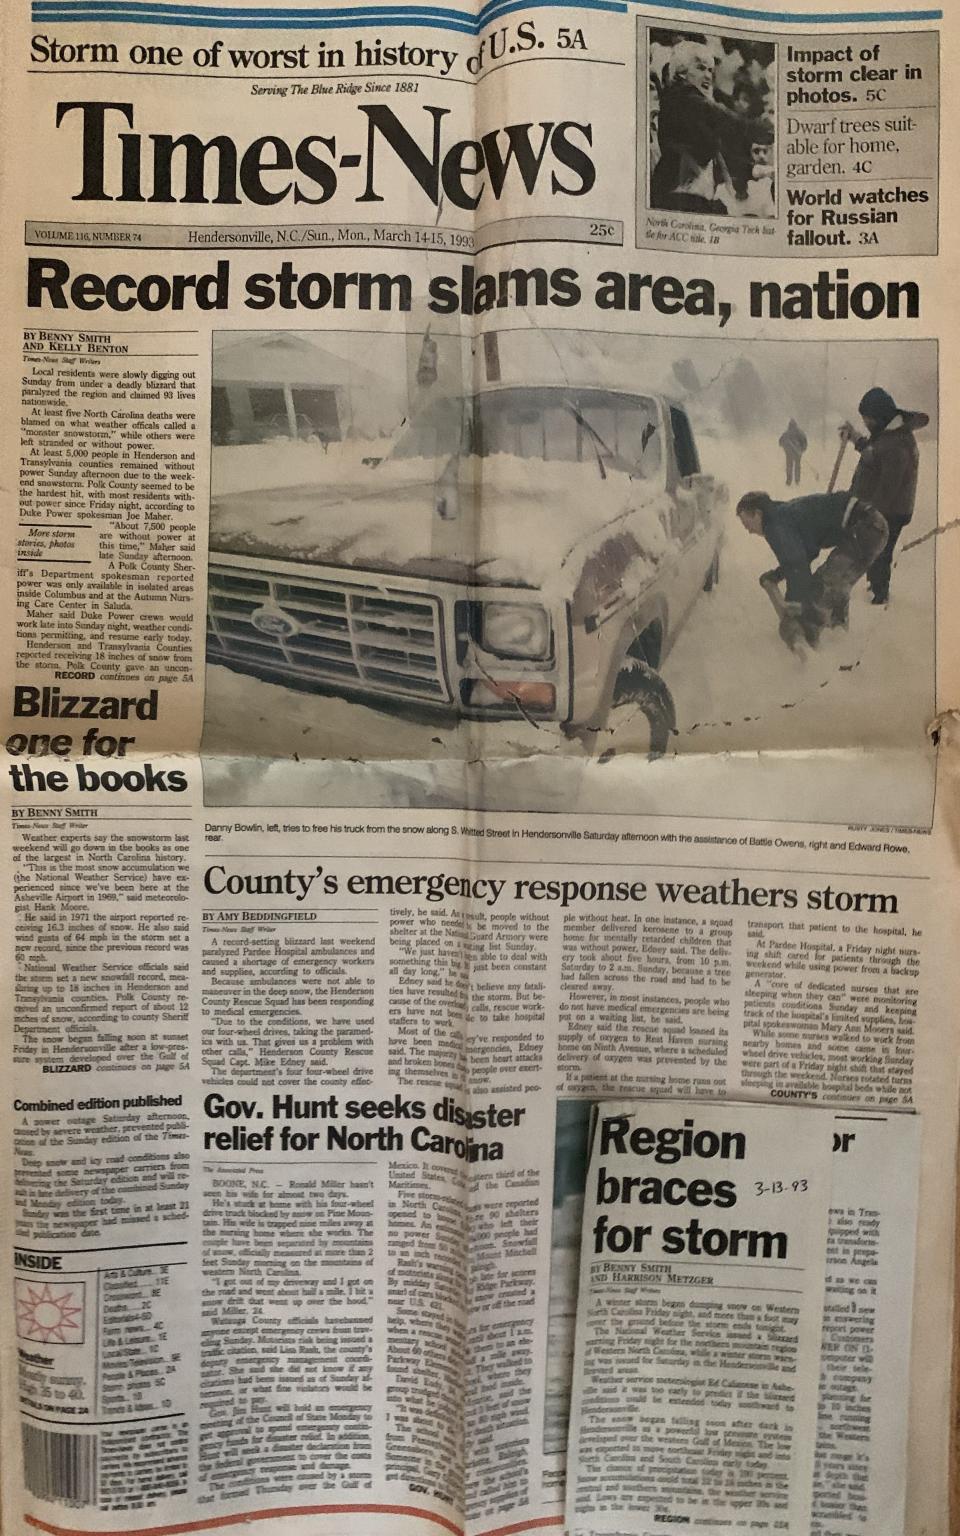 This was the front page of the Hendersonville Times-News dated March 14-15, 1993. It was the first two-day combined edition.